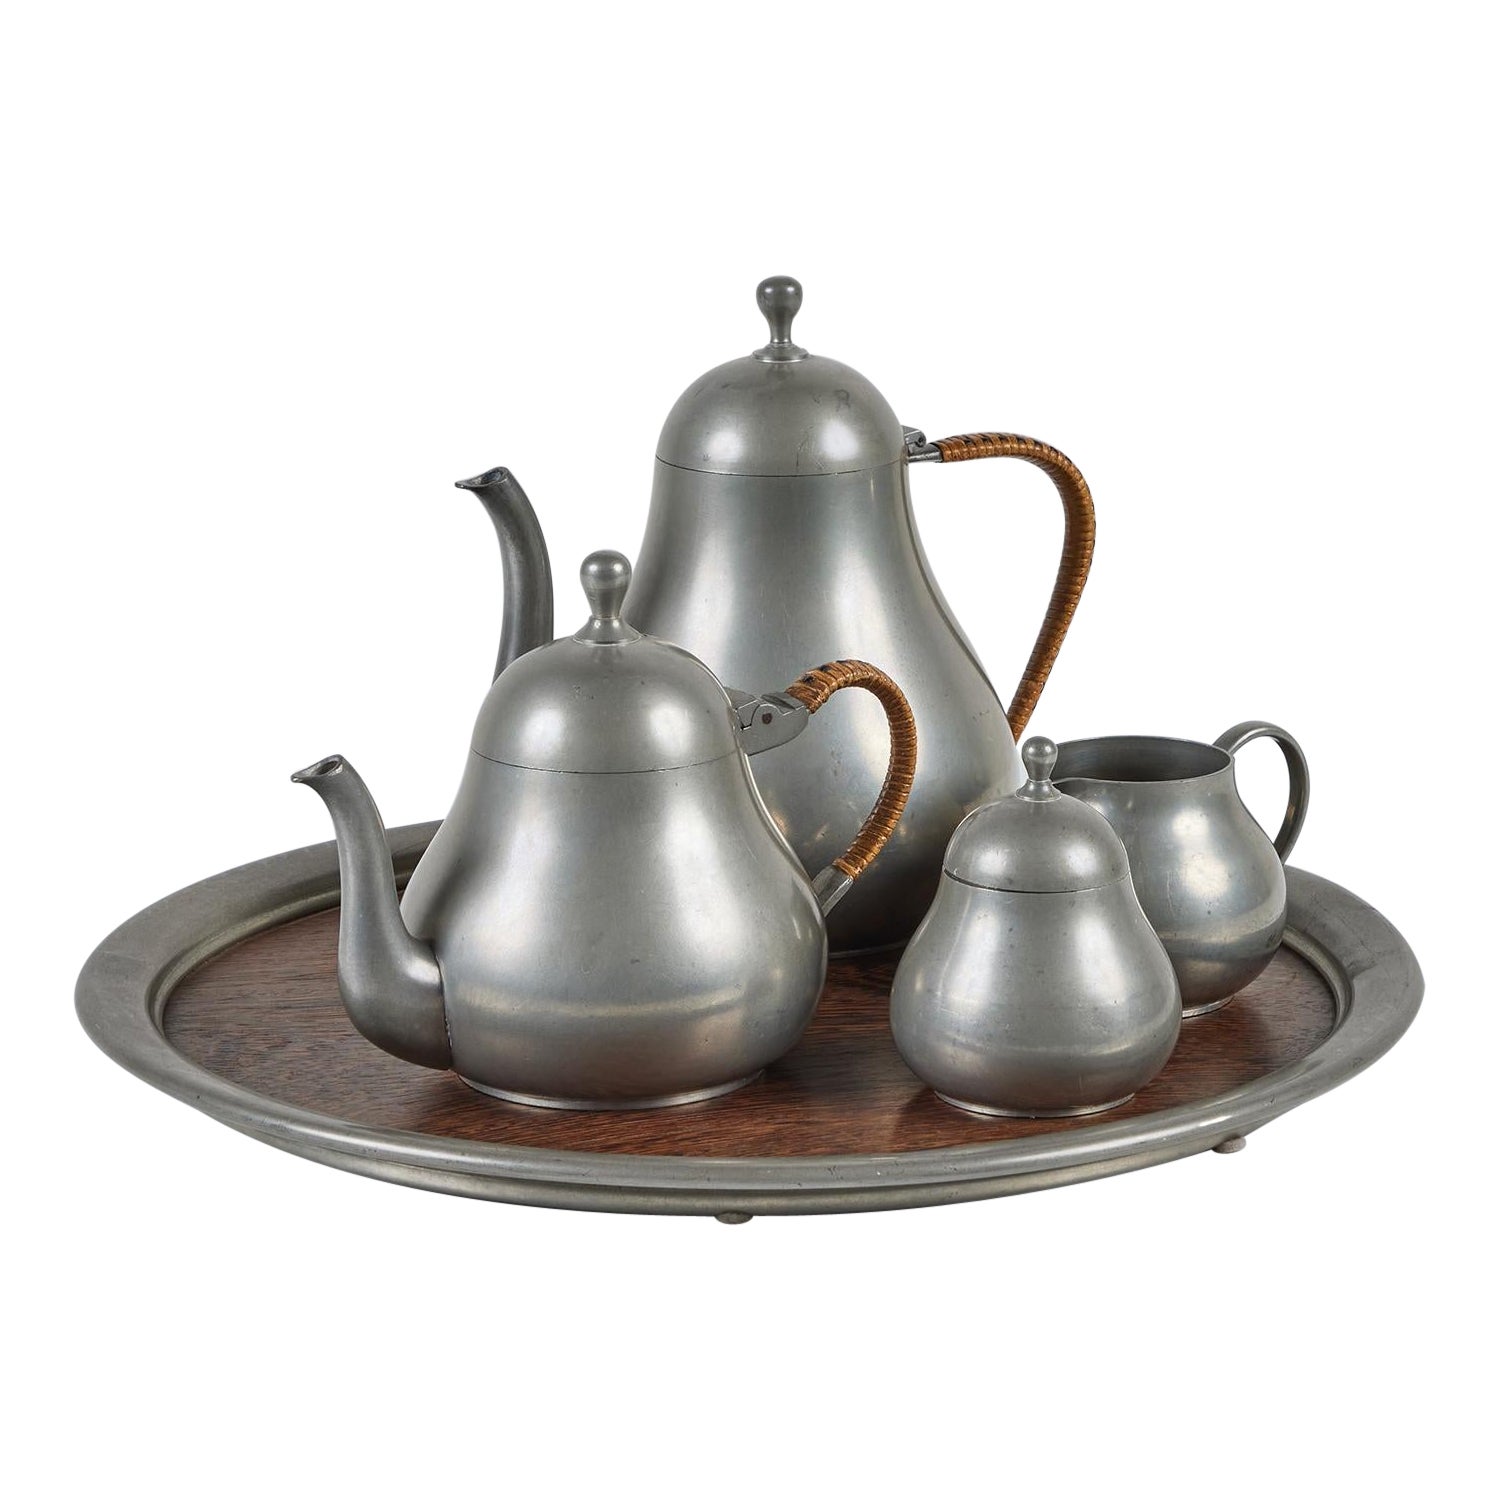 Meeuws & Zoon Den Haag Pewter Five Piece Coffee and Tea Service Set